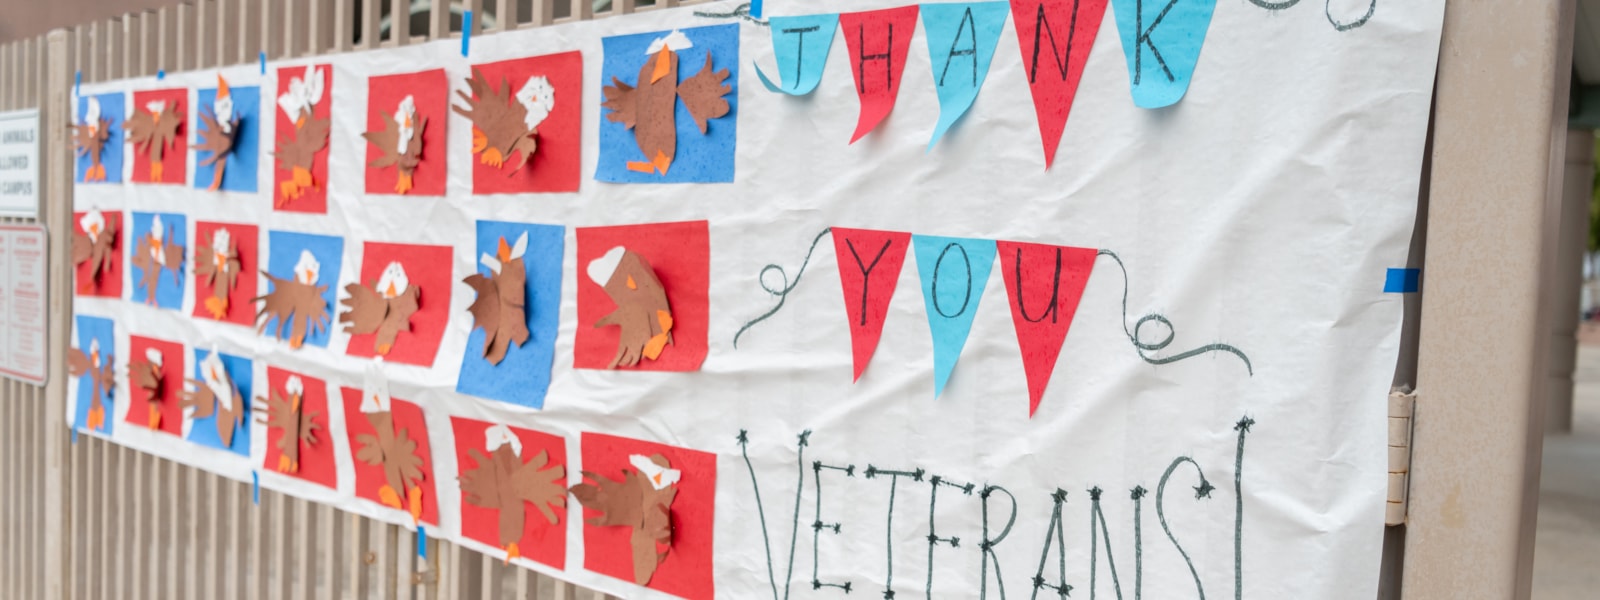 Veterans day banner made by students